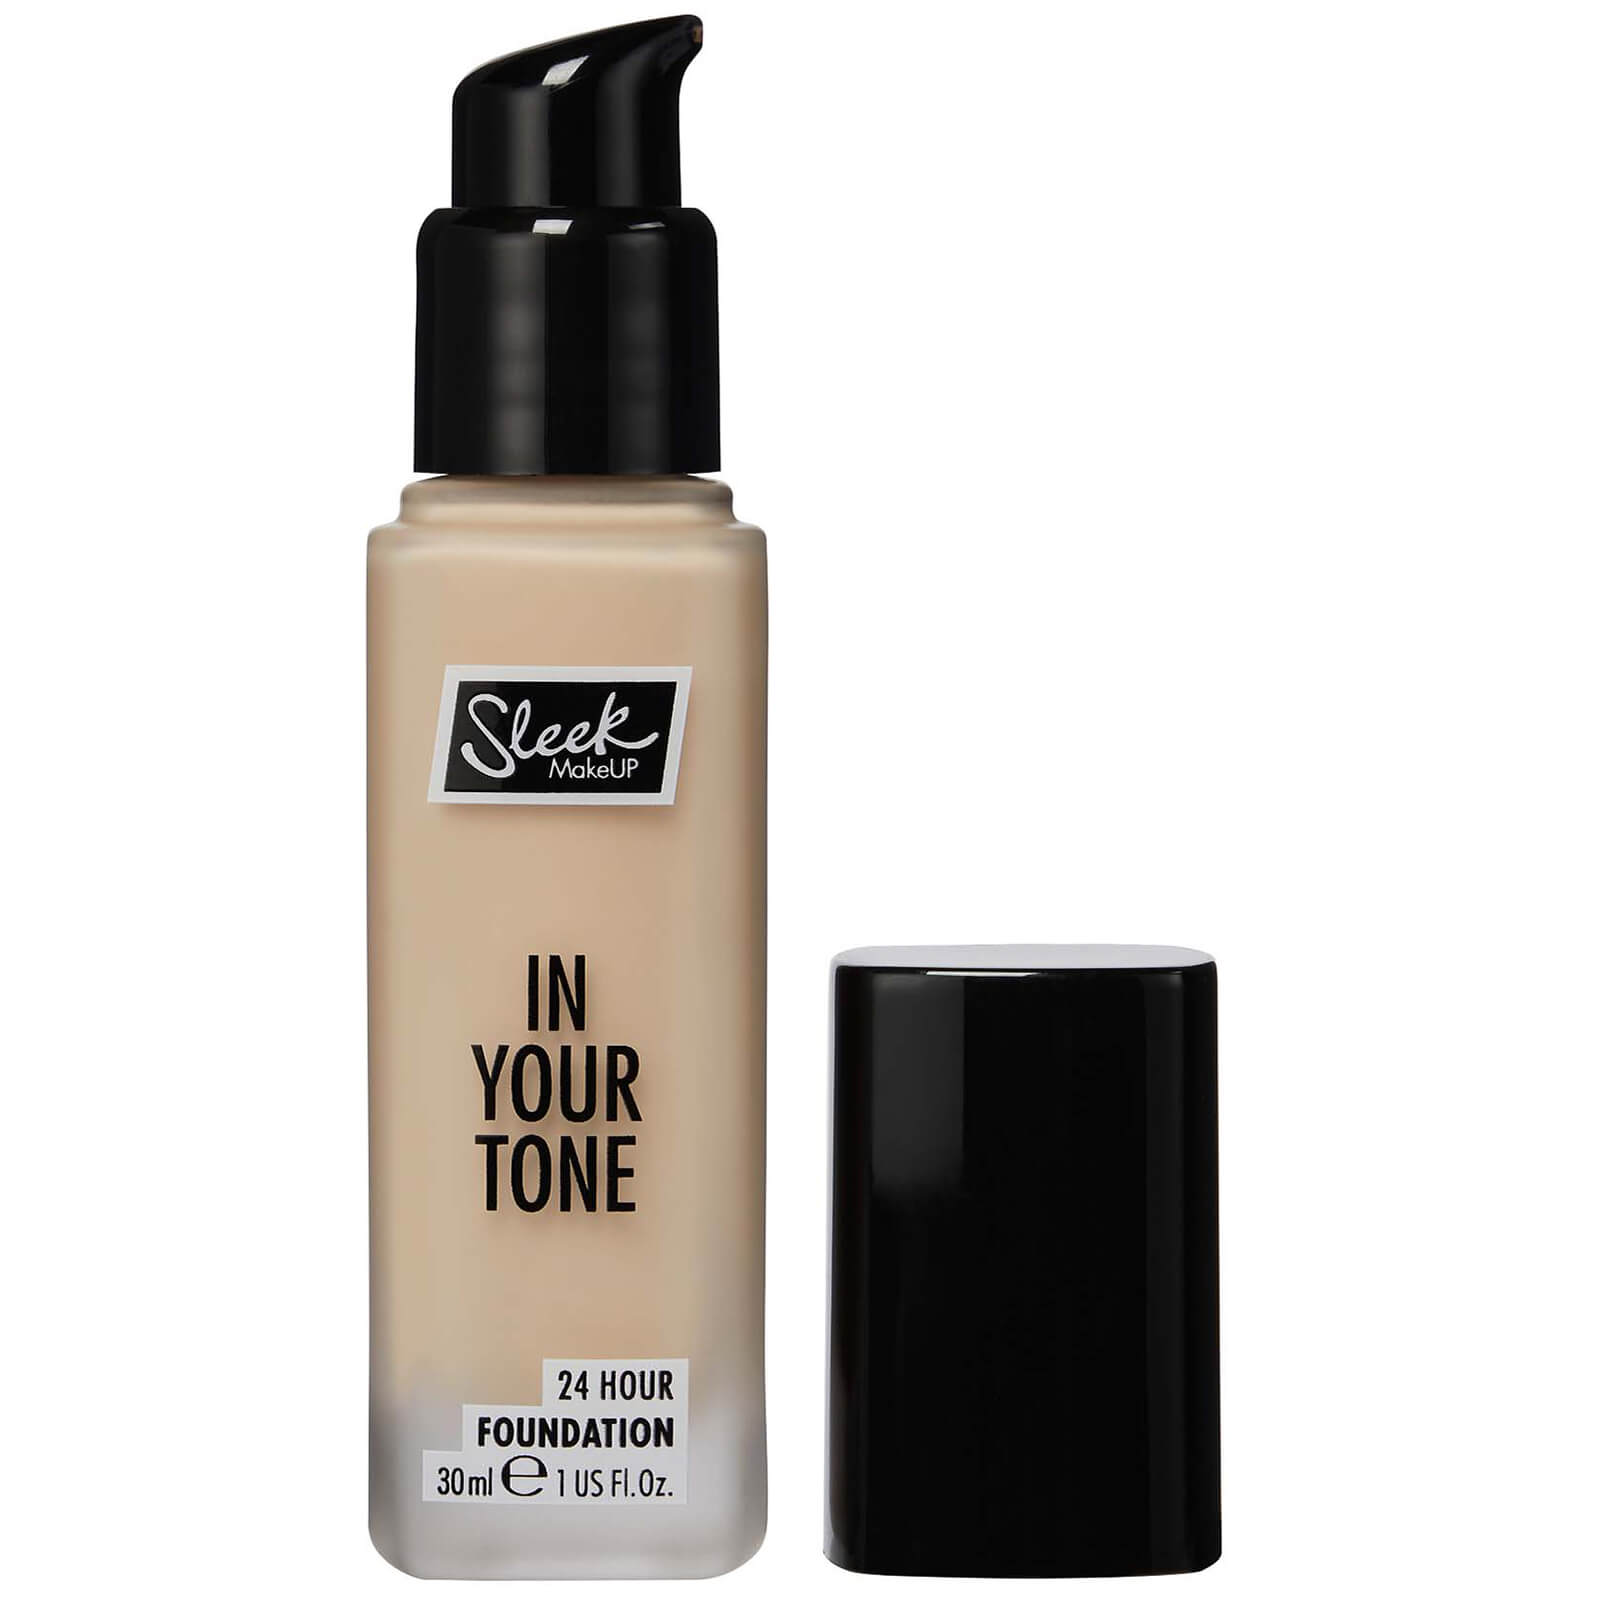 Sleek MakeUP in Your Tone 24 Hour Foundation 30ml (Various Shades) - 2W